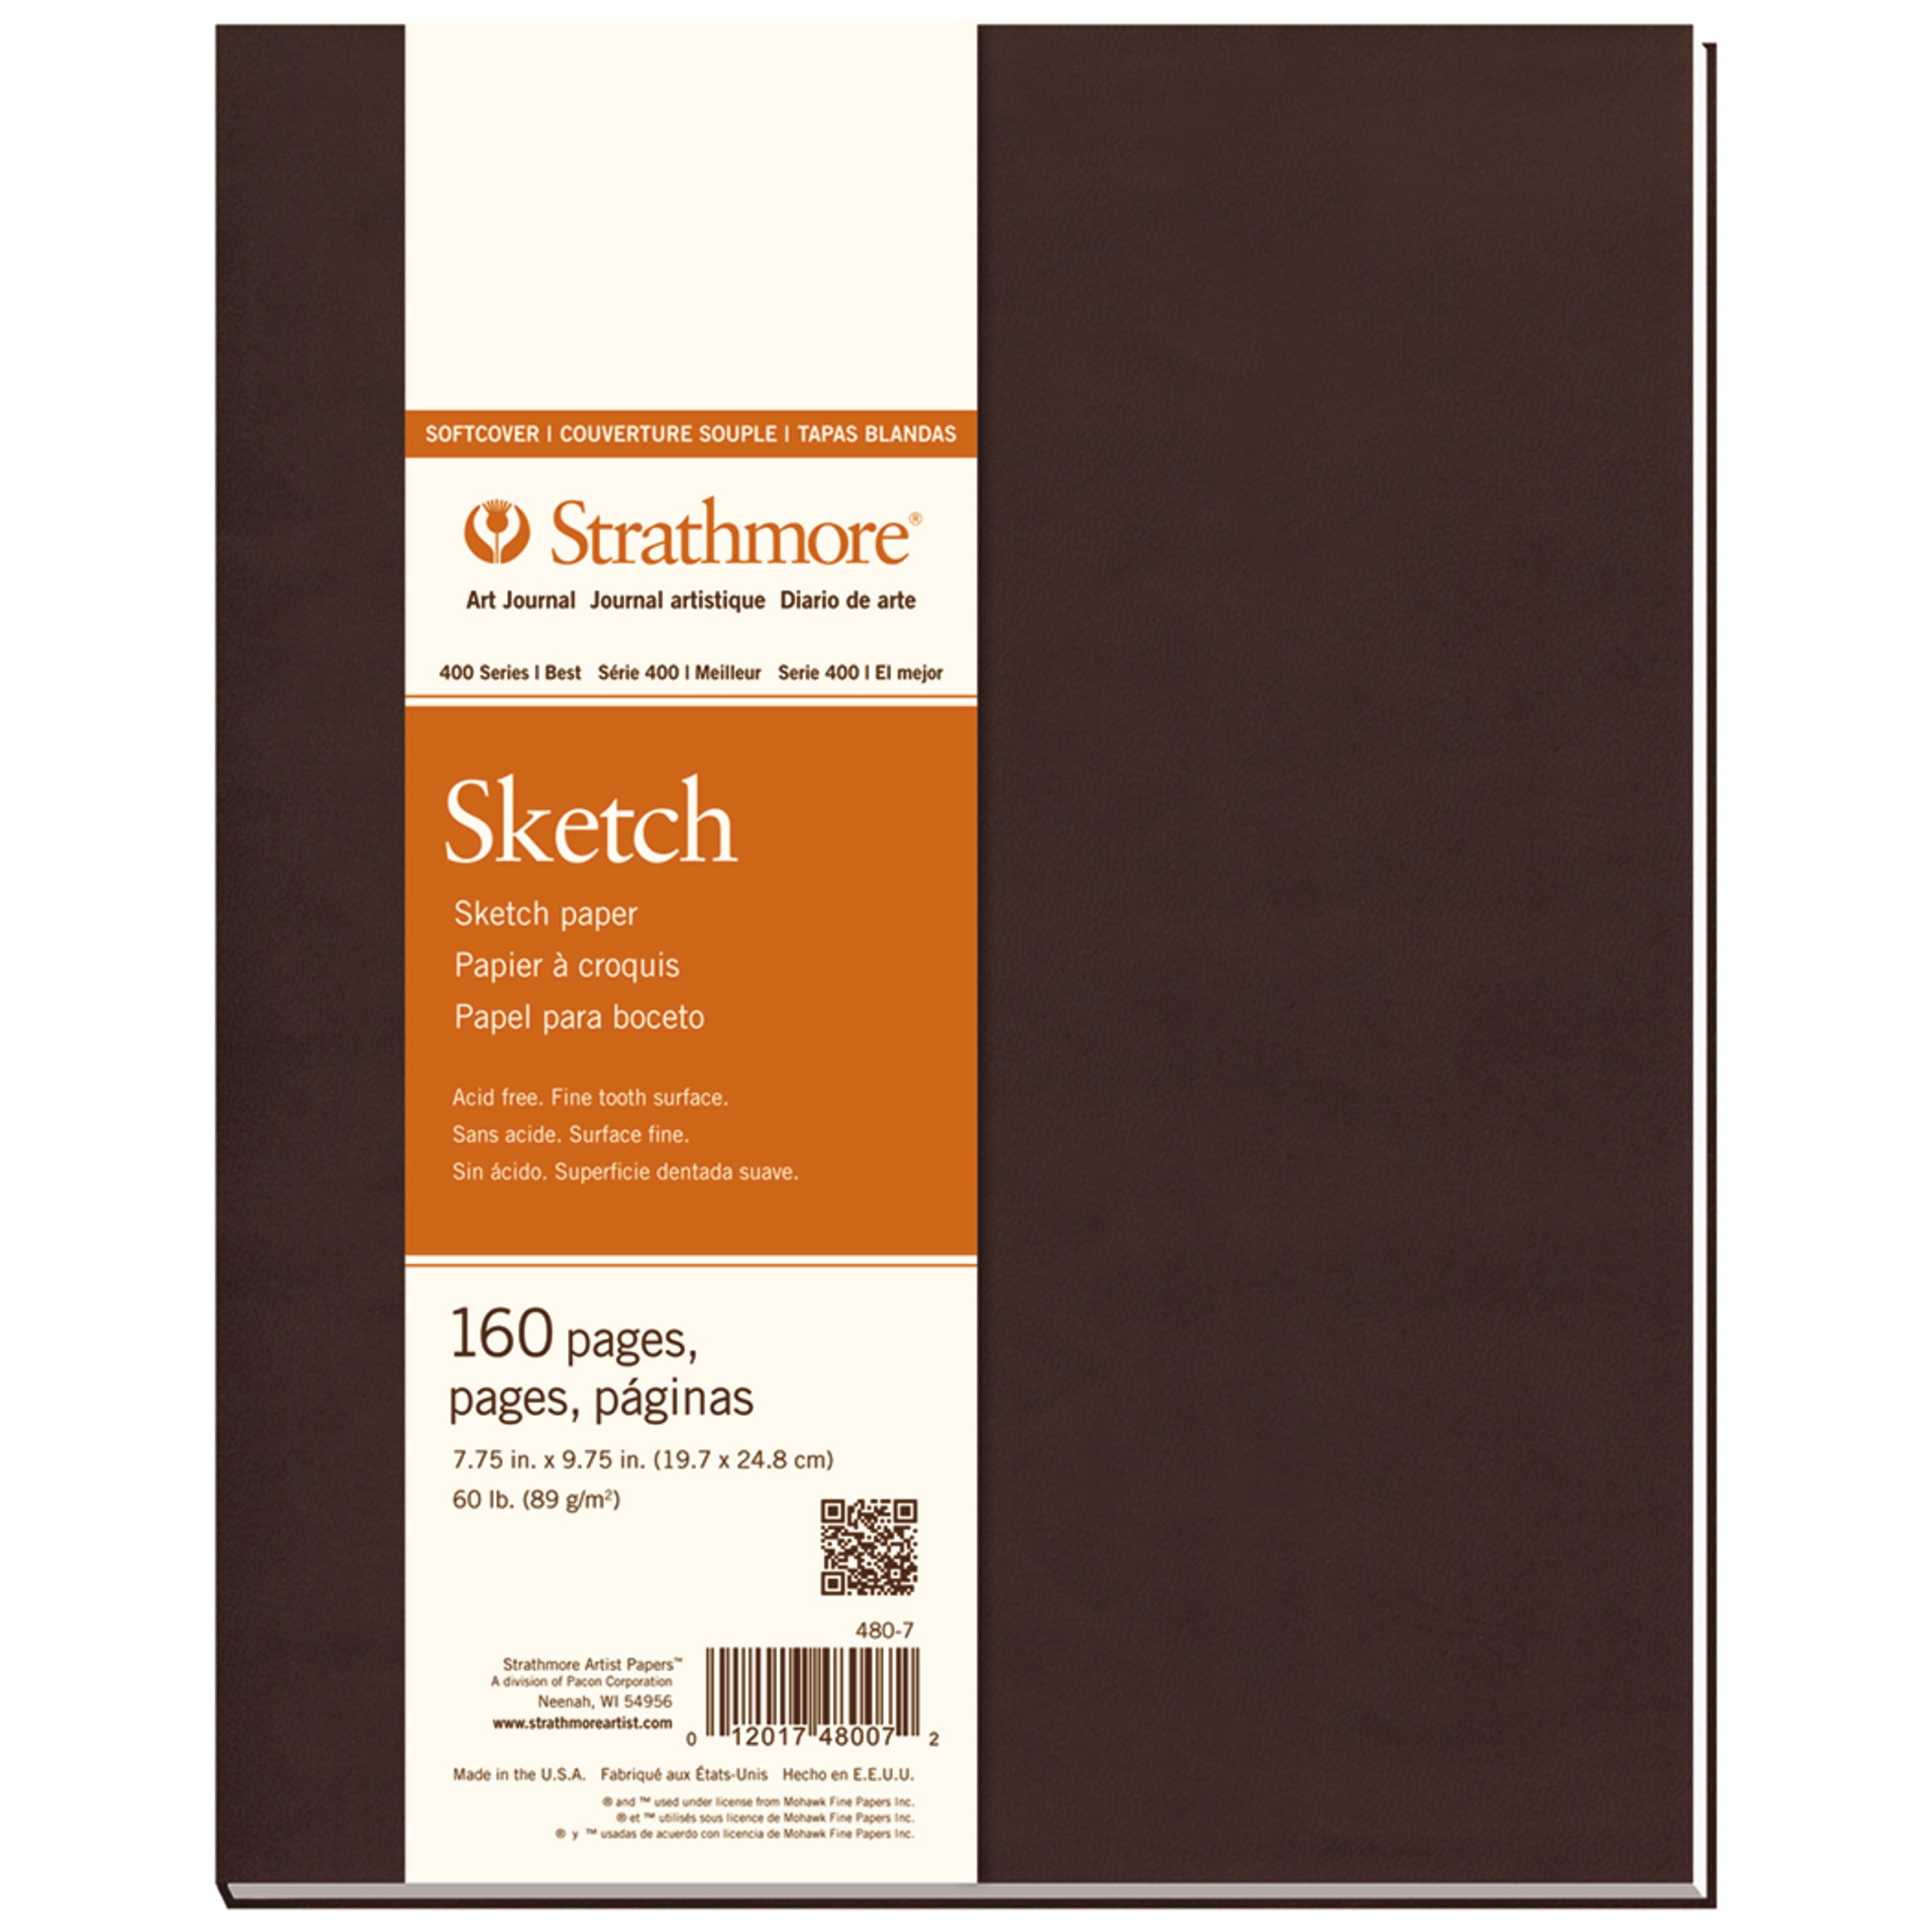 Strathmore 400 Series Softcover Sketching Art Journal 5-1/2x8 (160 pg) -  White